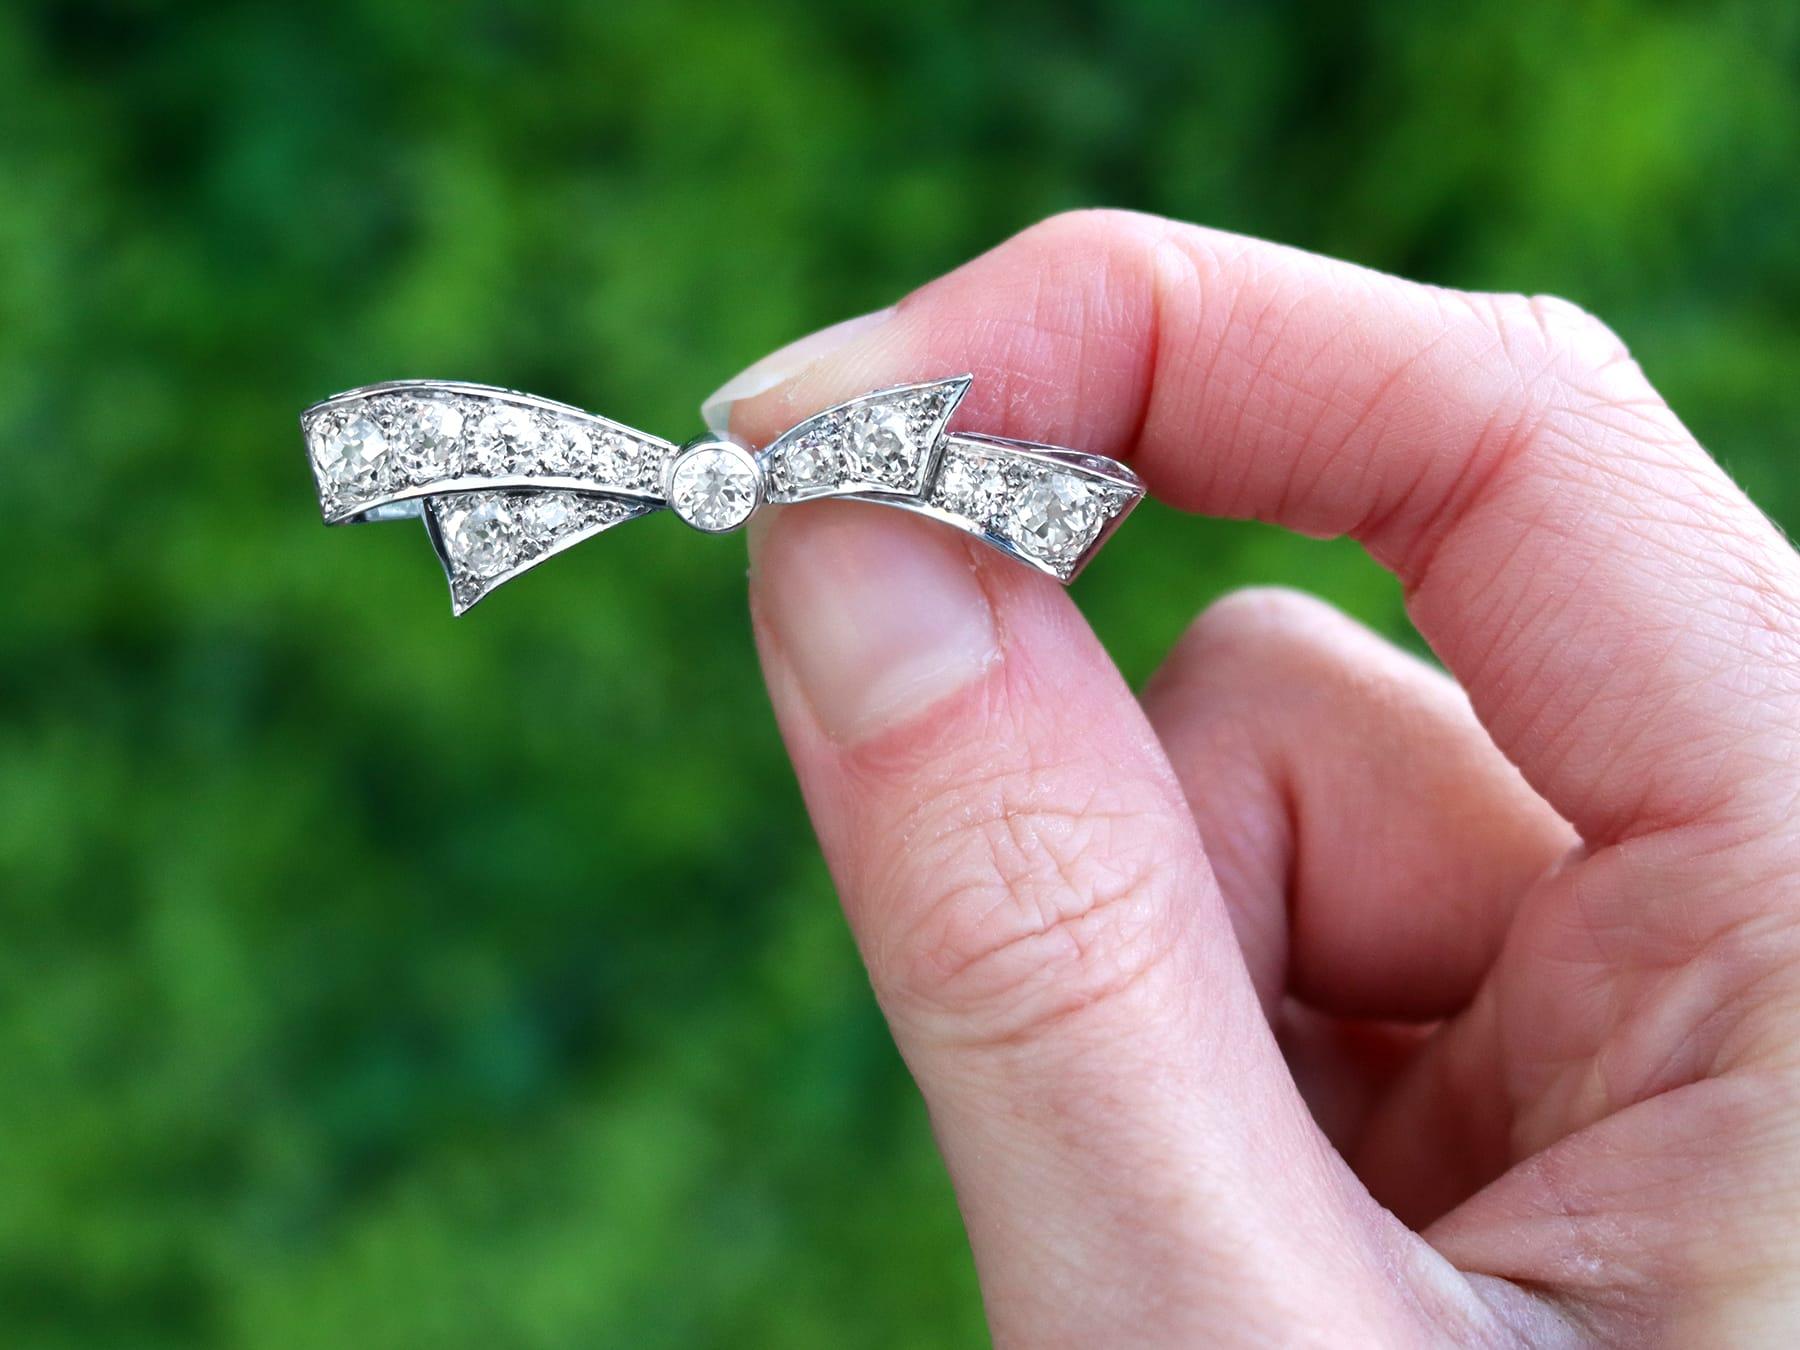 A stunning, fine and impressive 4.45 carat diamond and platinum bow brooch; part of our antique jewelry and estate jewelry collections

This stunning, fine and impressive antique diamond brooch has been crafted in platinum.

The brooch has been